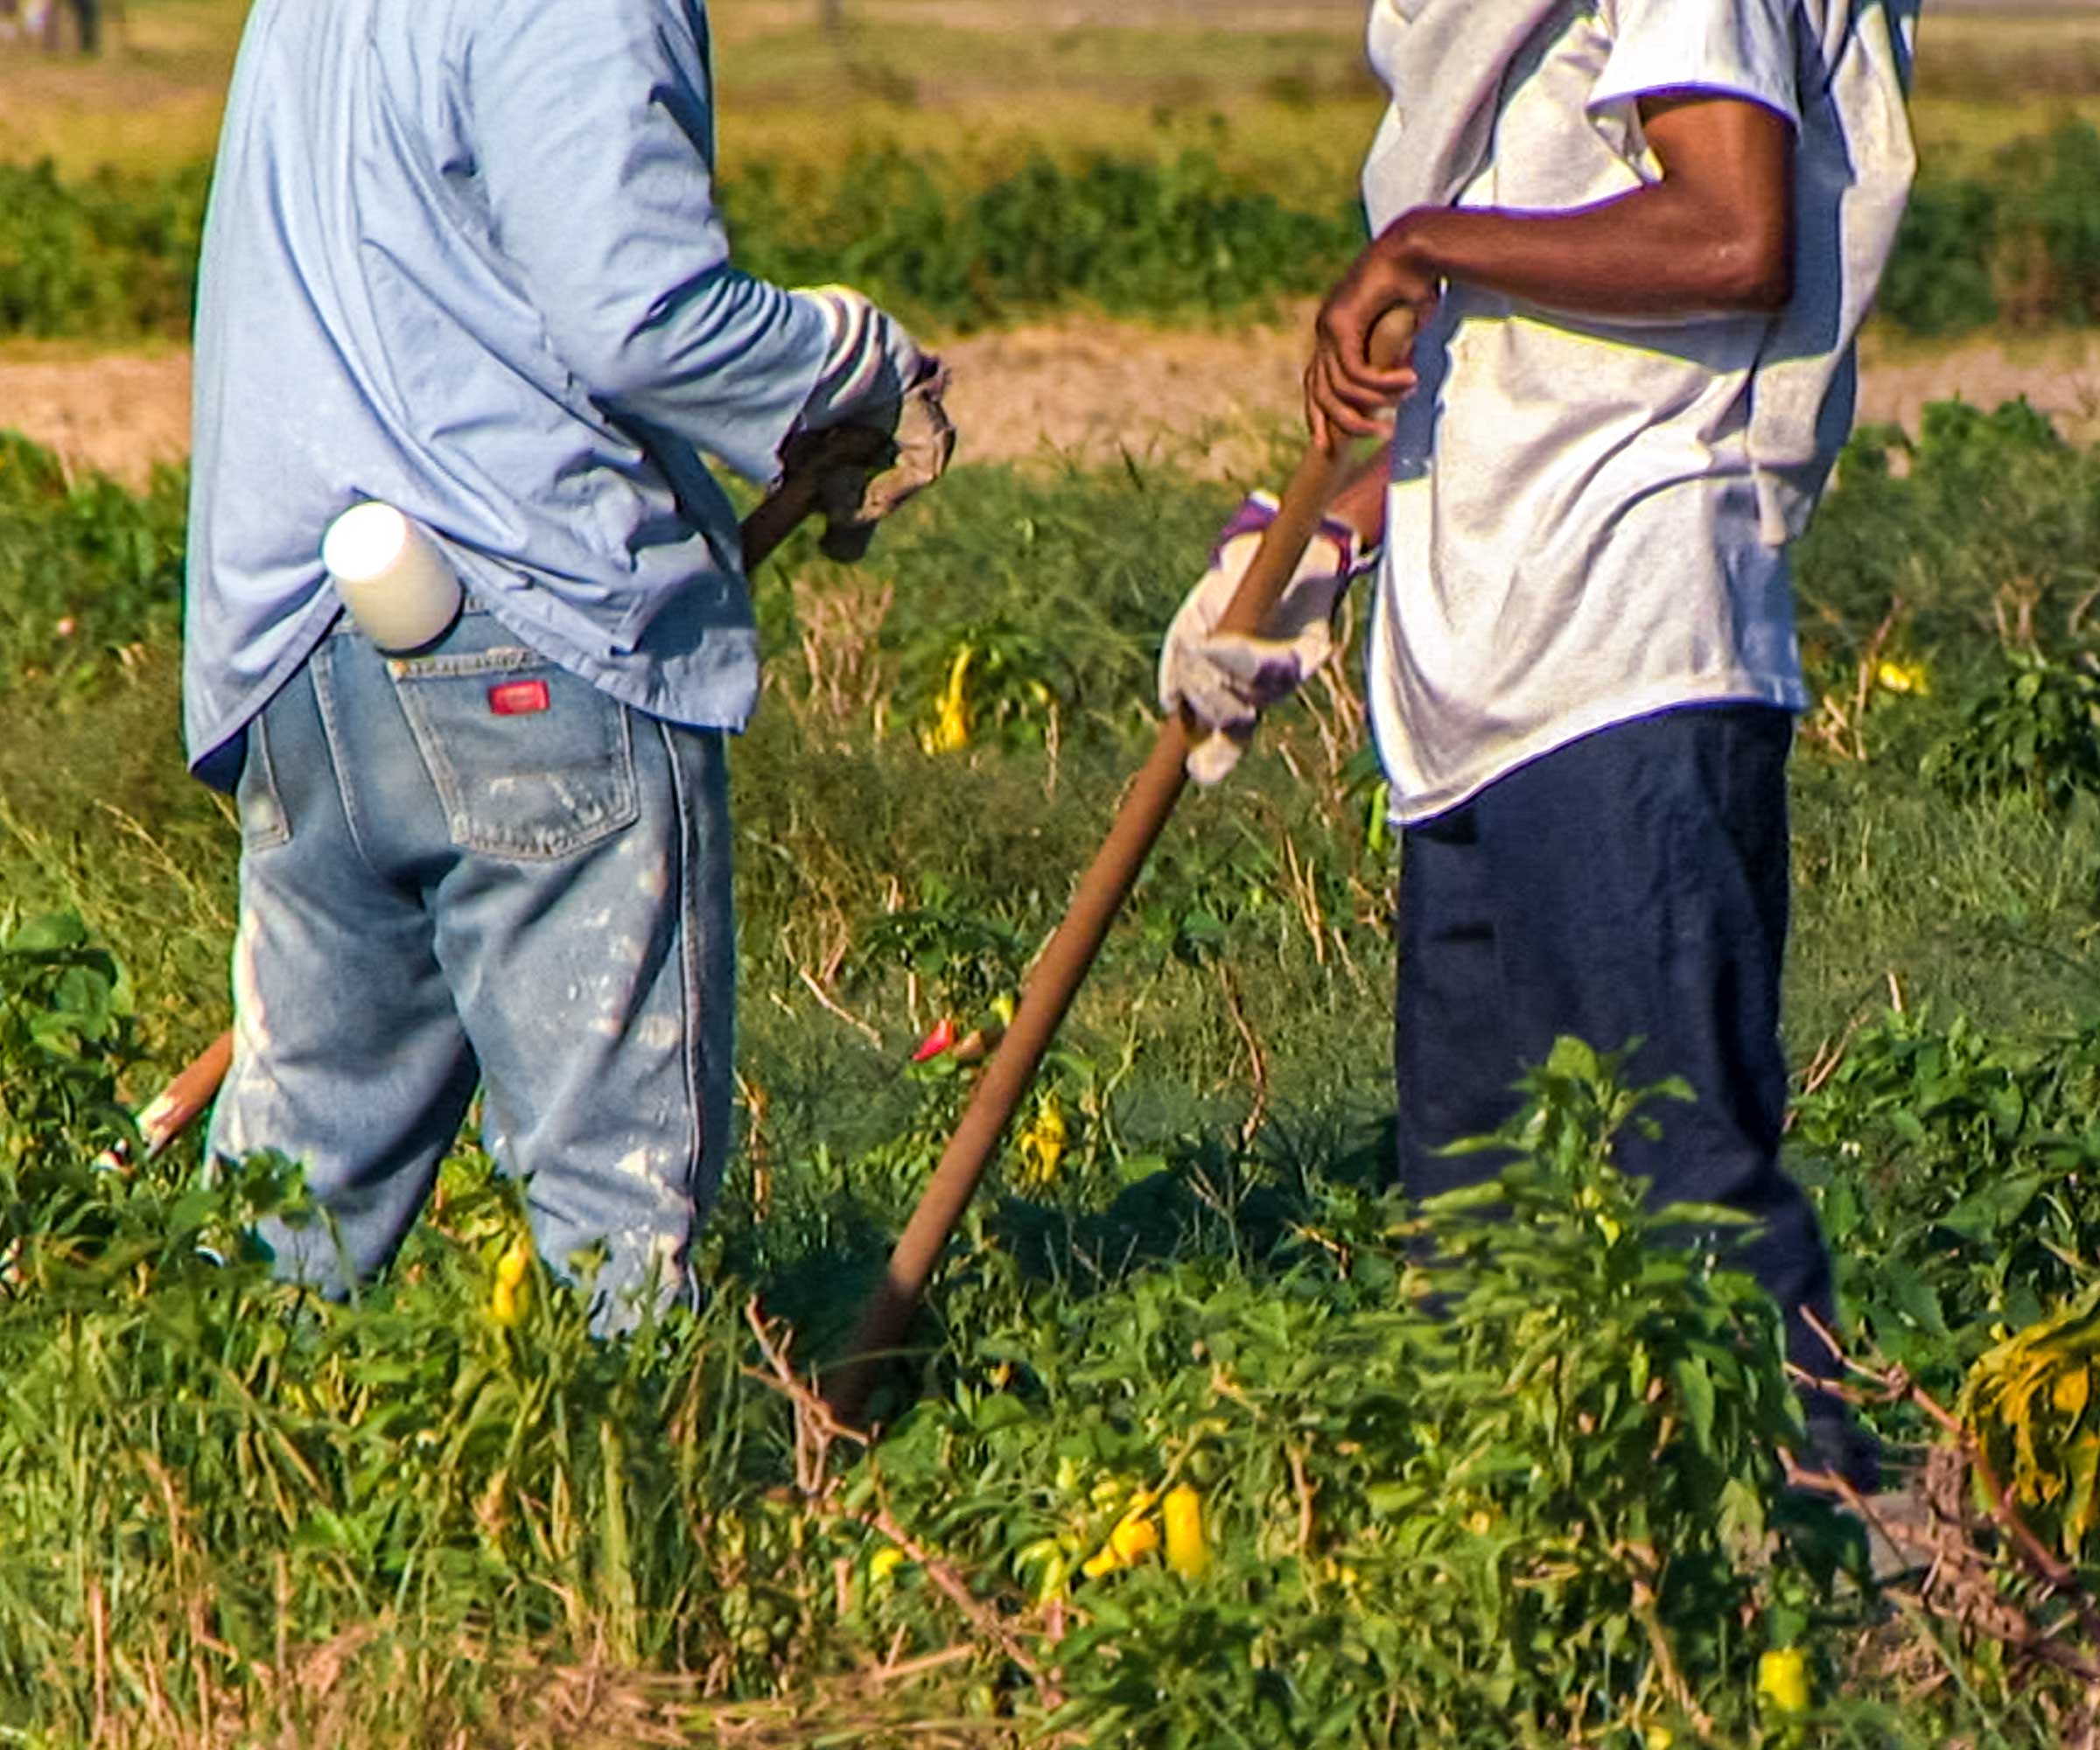 Prisoners at the maximum security Louisiana State Penitentiary known as Angola at work in the prison farm. © HBO